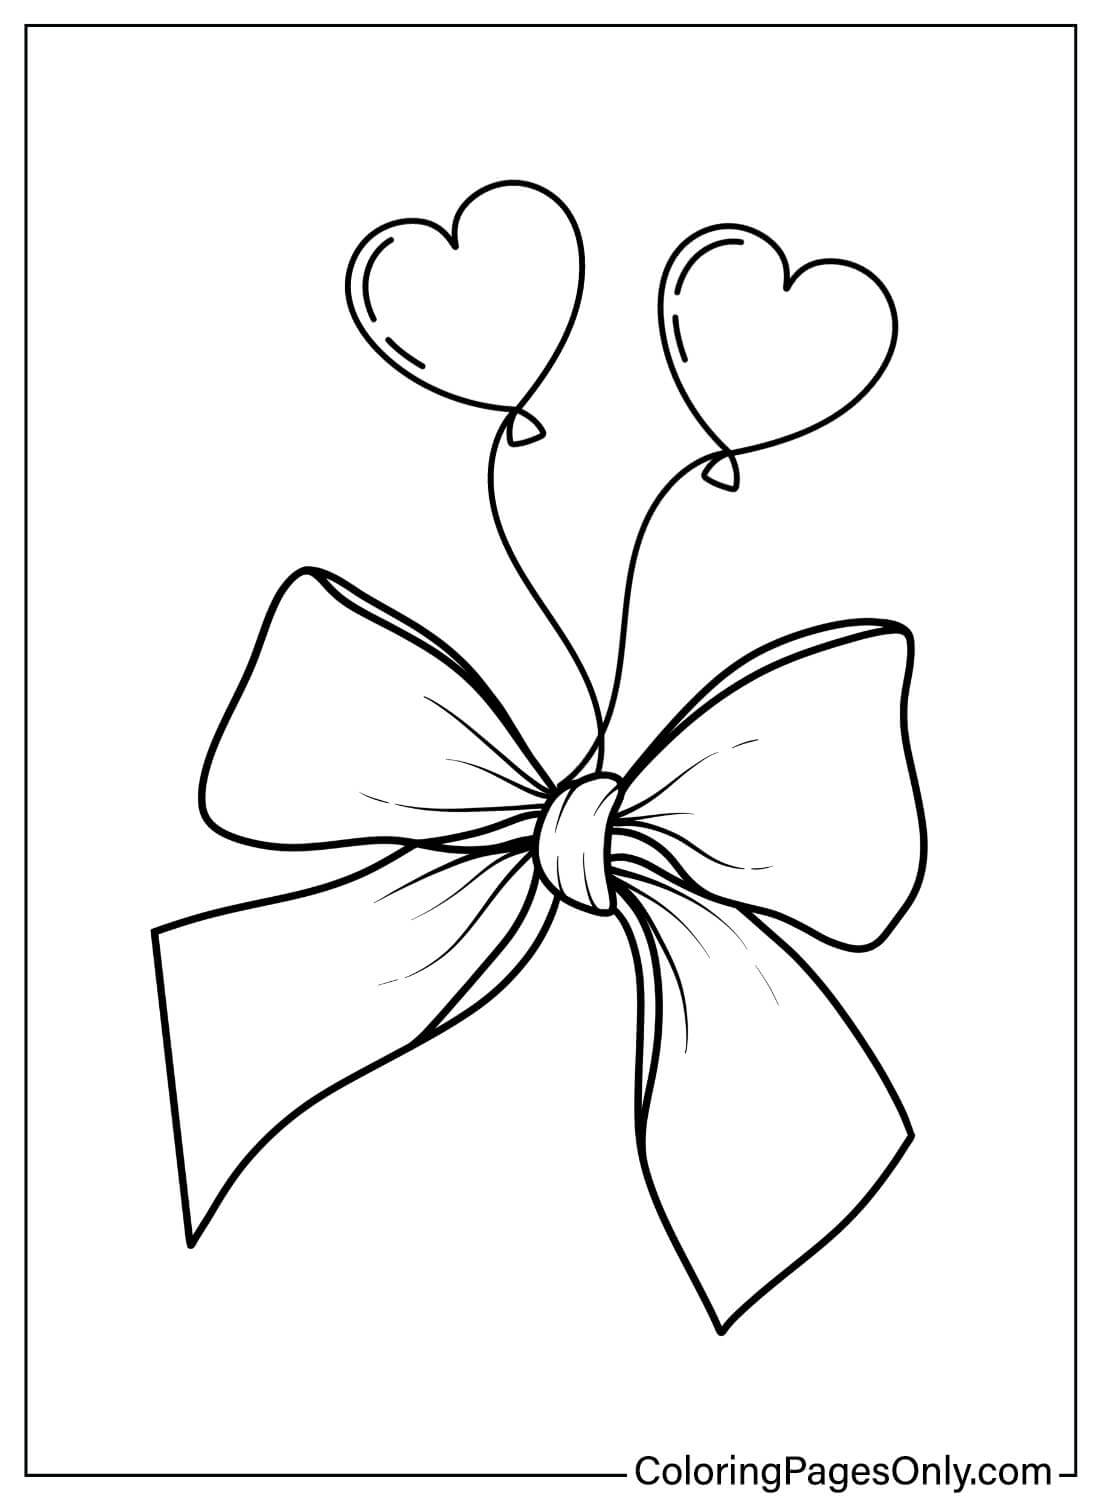 Coloring Page Bow Printable from Bow